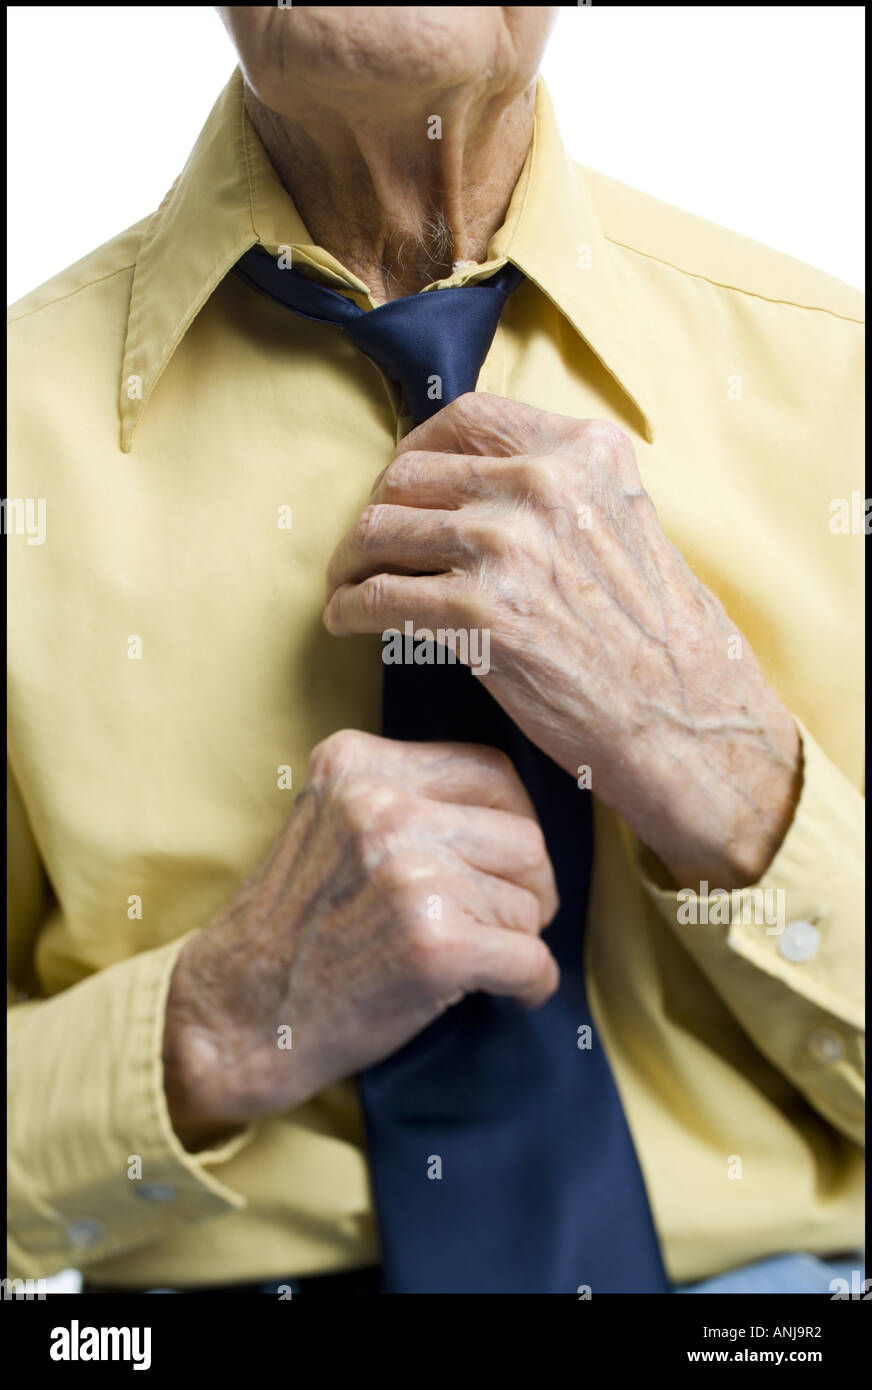 Mid section view of a senior man getting dressed Stock Photo